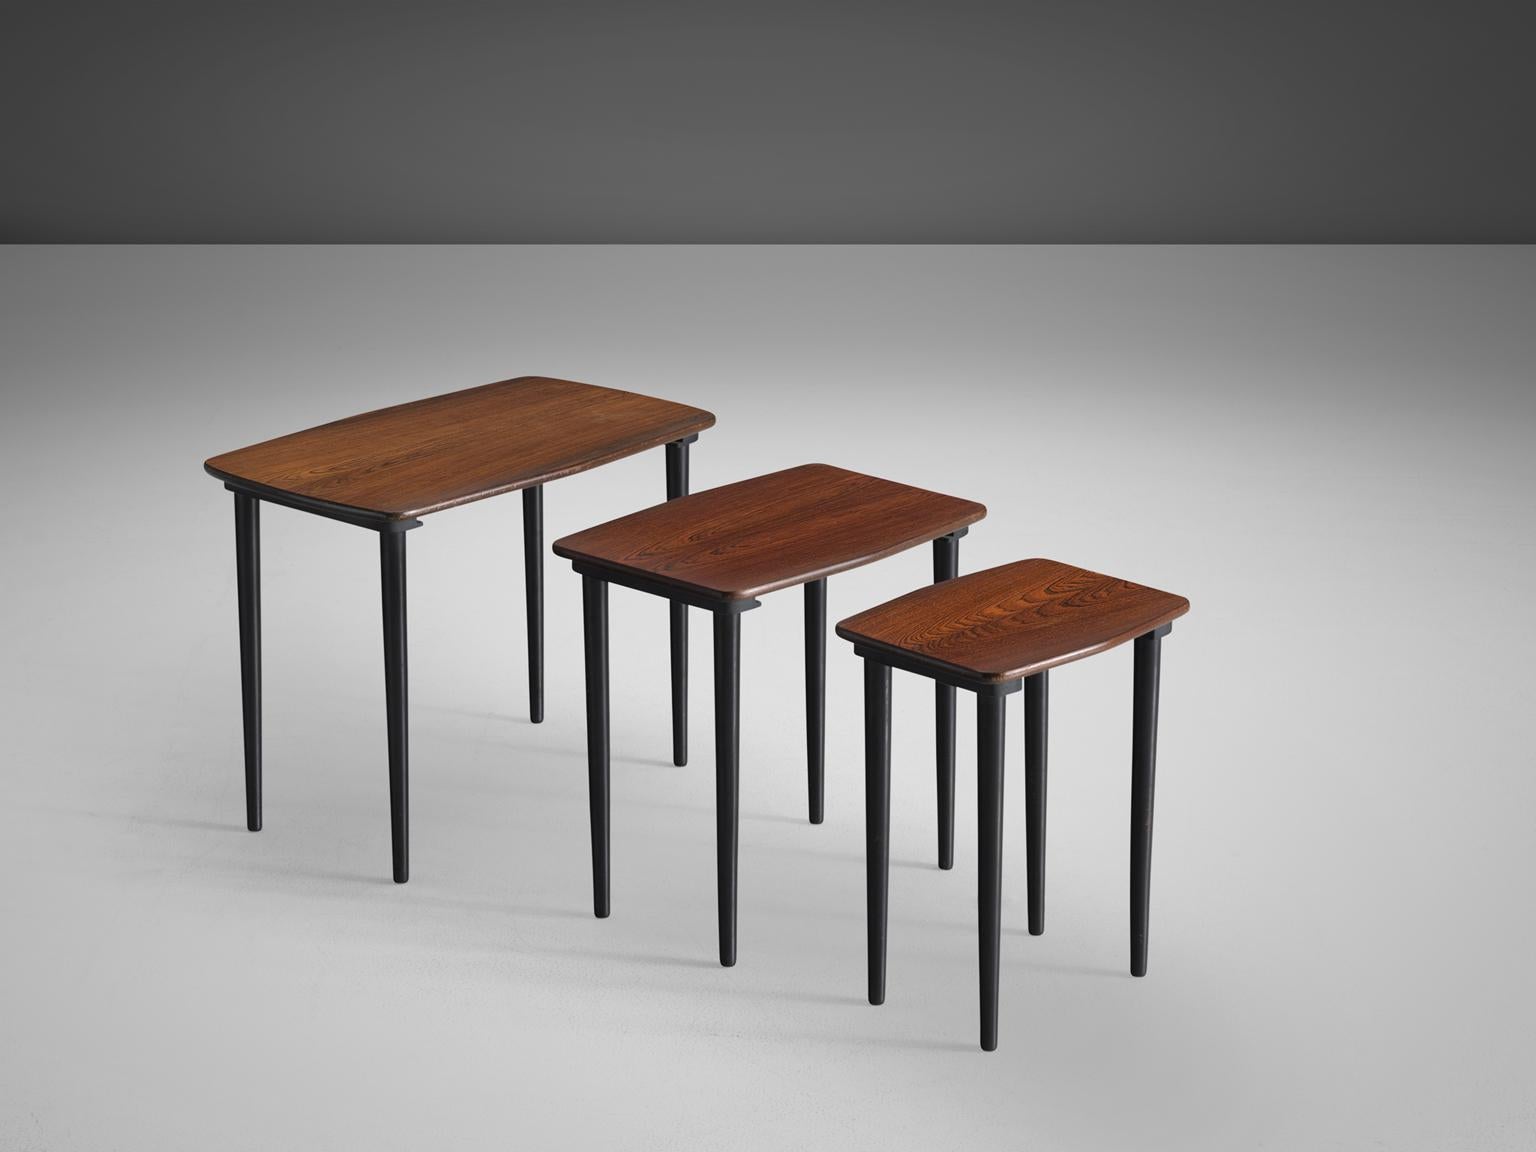 Set of three nesting tables, in dark wood, Scandinavia, 1950s.

Elegant set of three nesting tables. Each tables has a rectangular top with a soft, rounded border. The cylindrical legs are tapered with a round thickening at the end. The teak has a